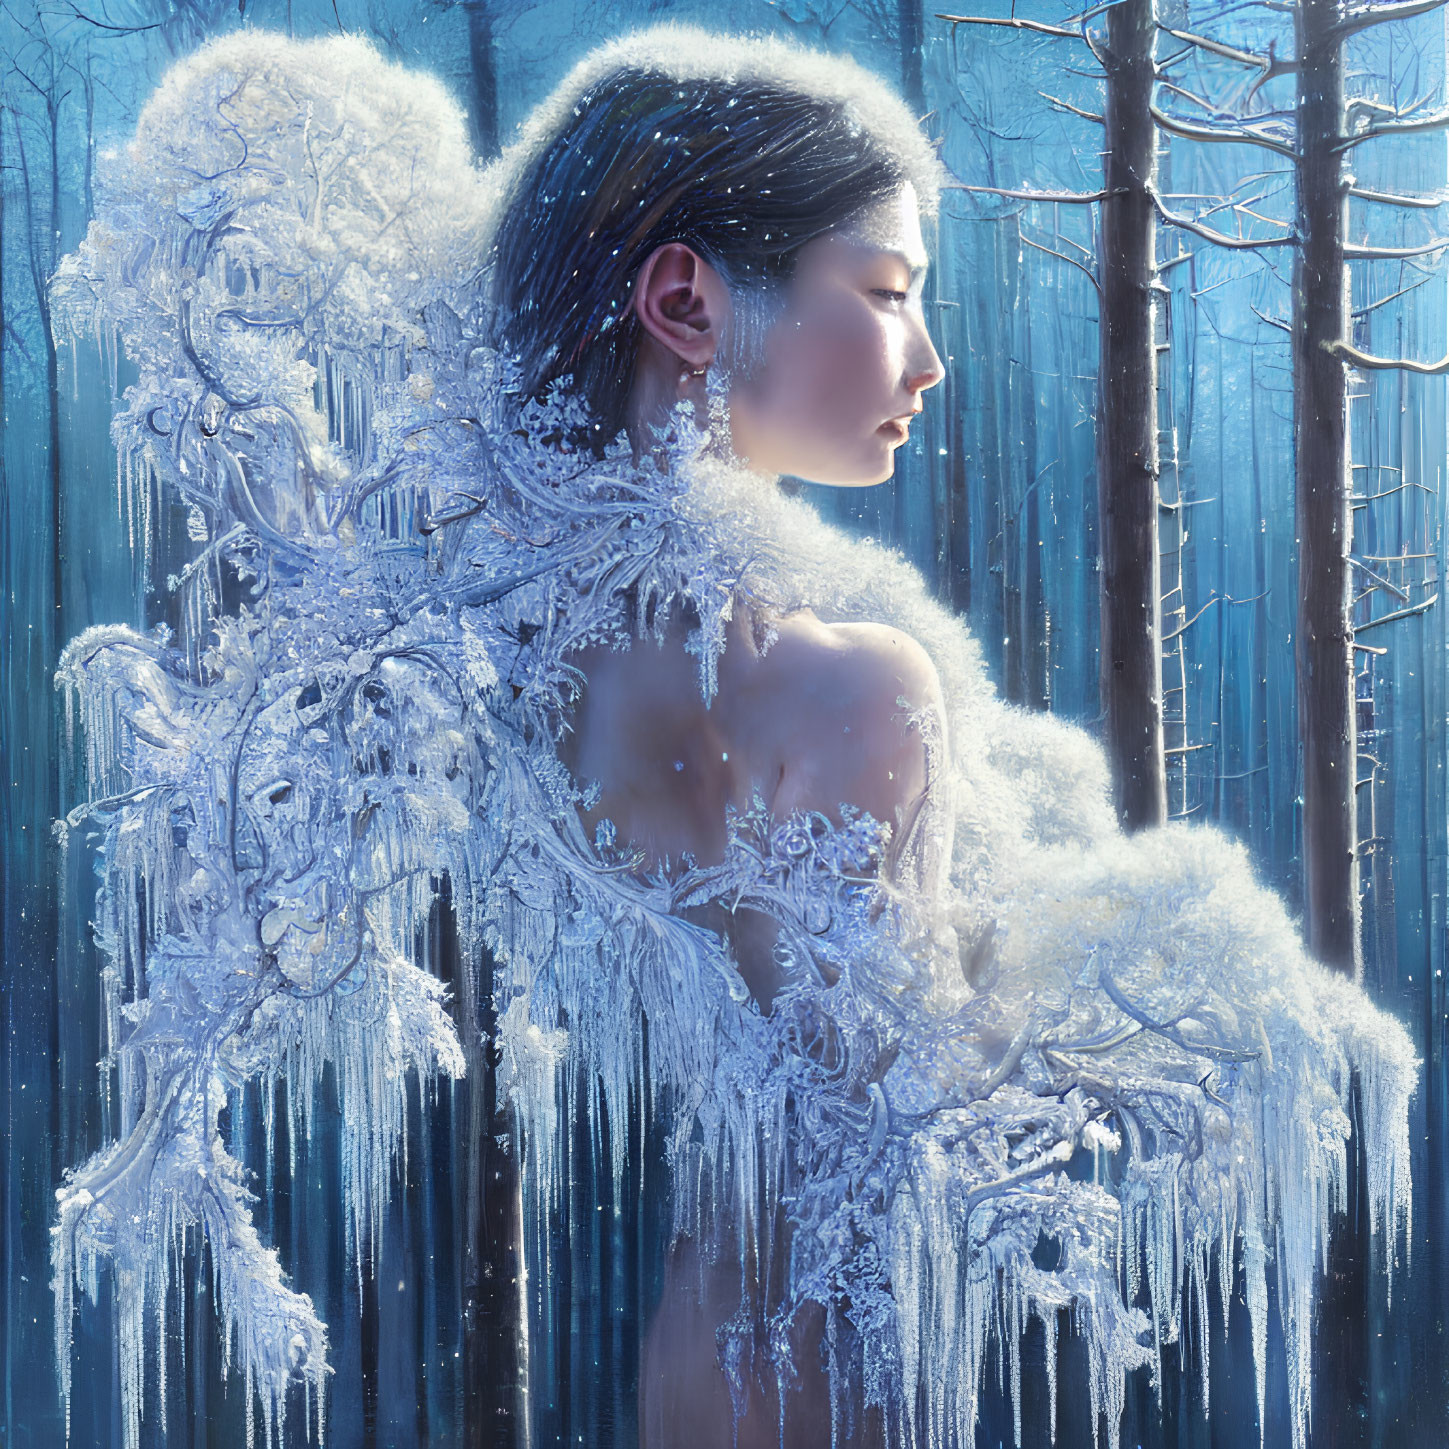 Mystical woman with ice wings in snowy forest landscape